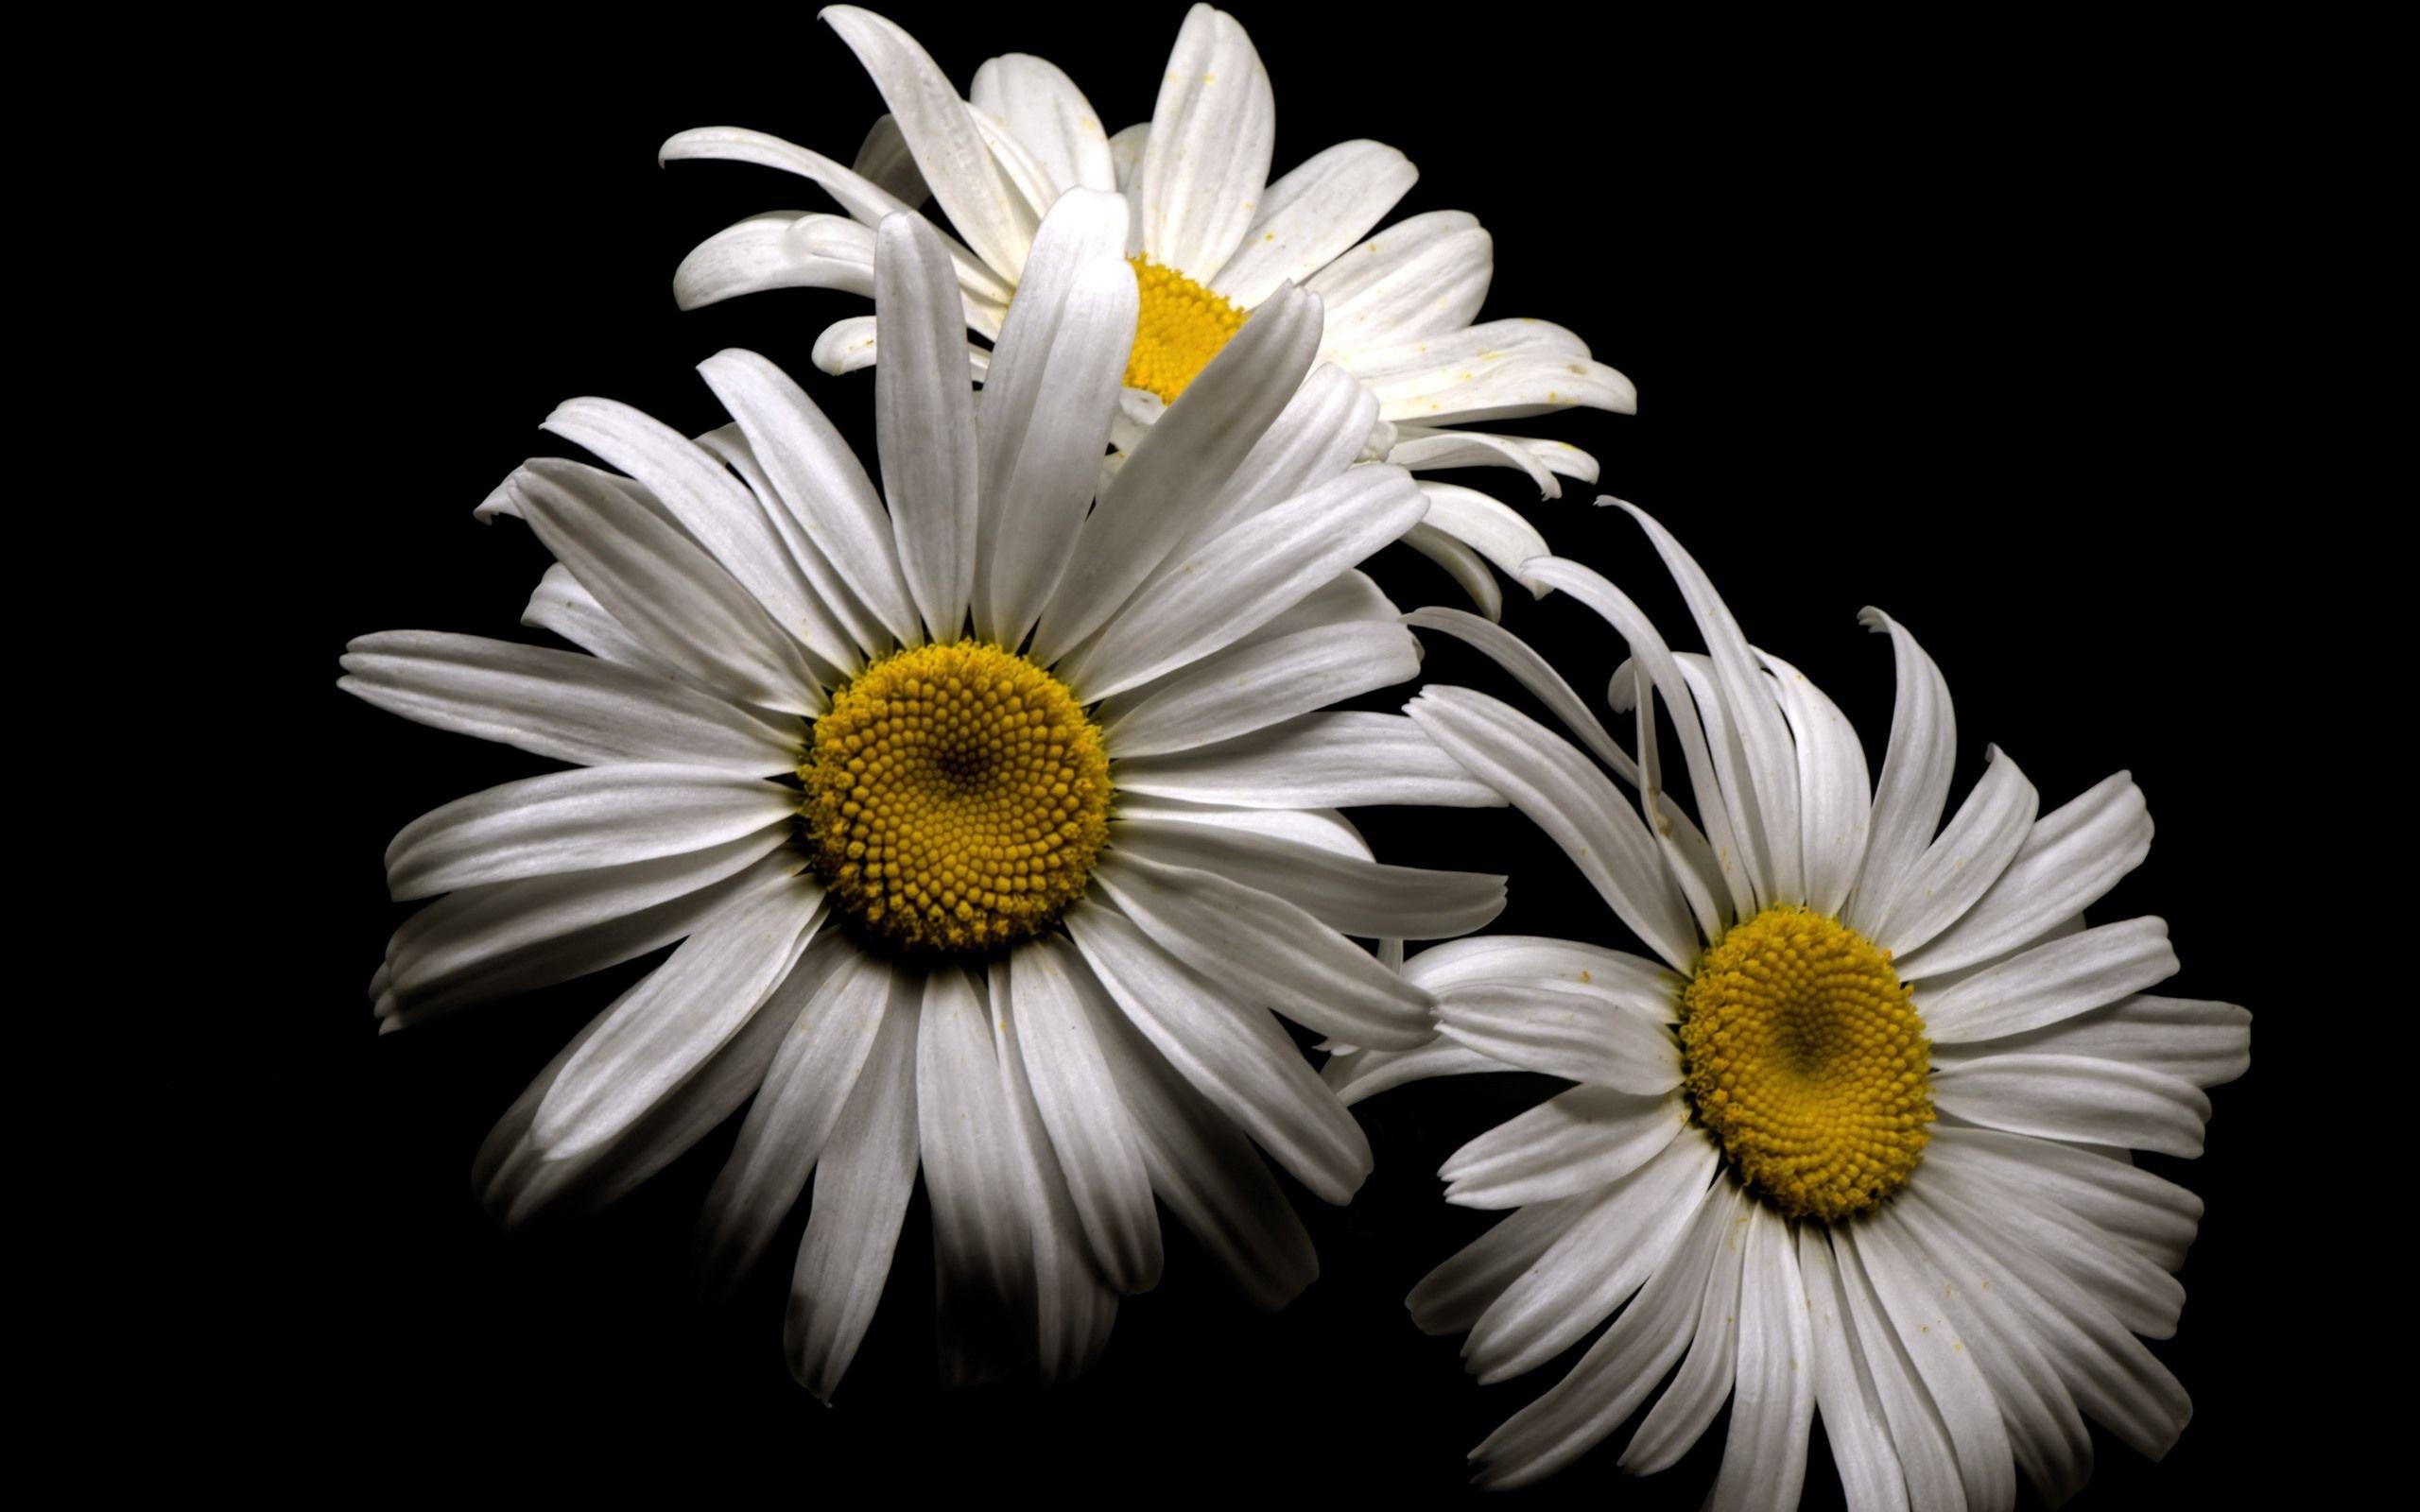 Black And White Daisy Wallpapers Top Free Black And White Daisy